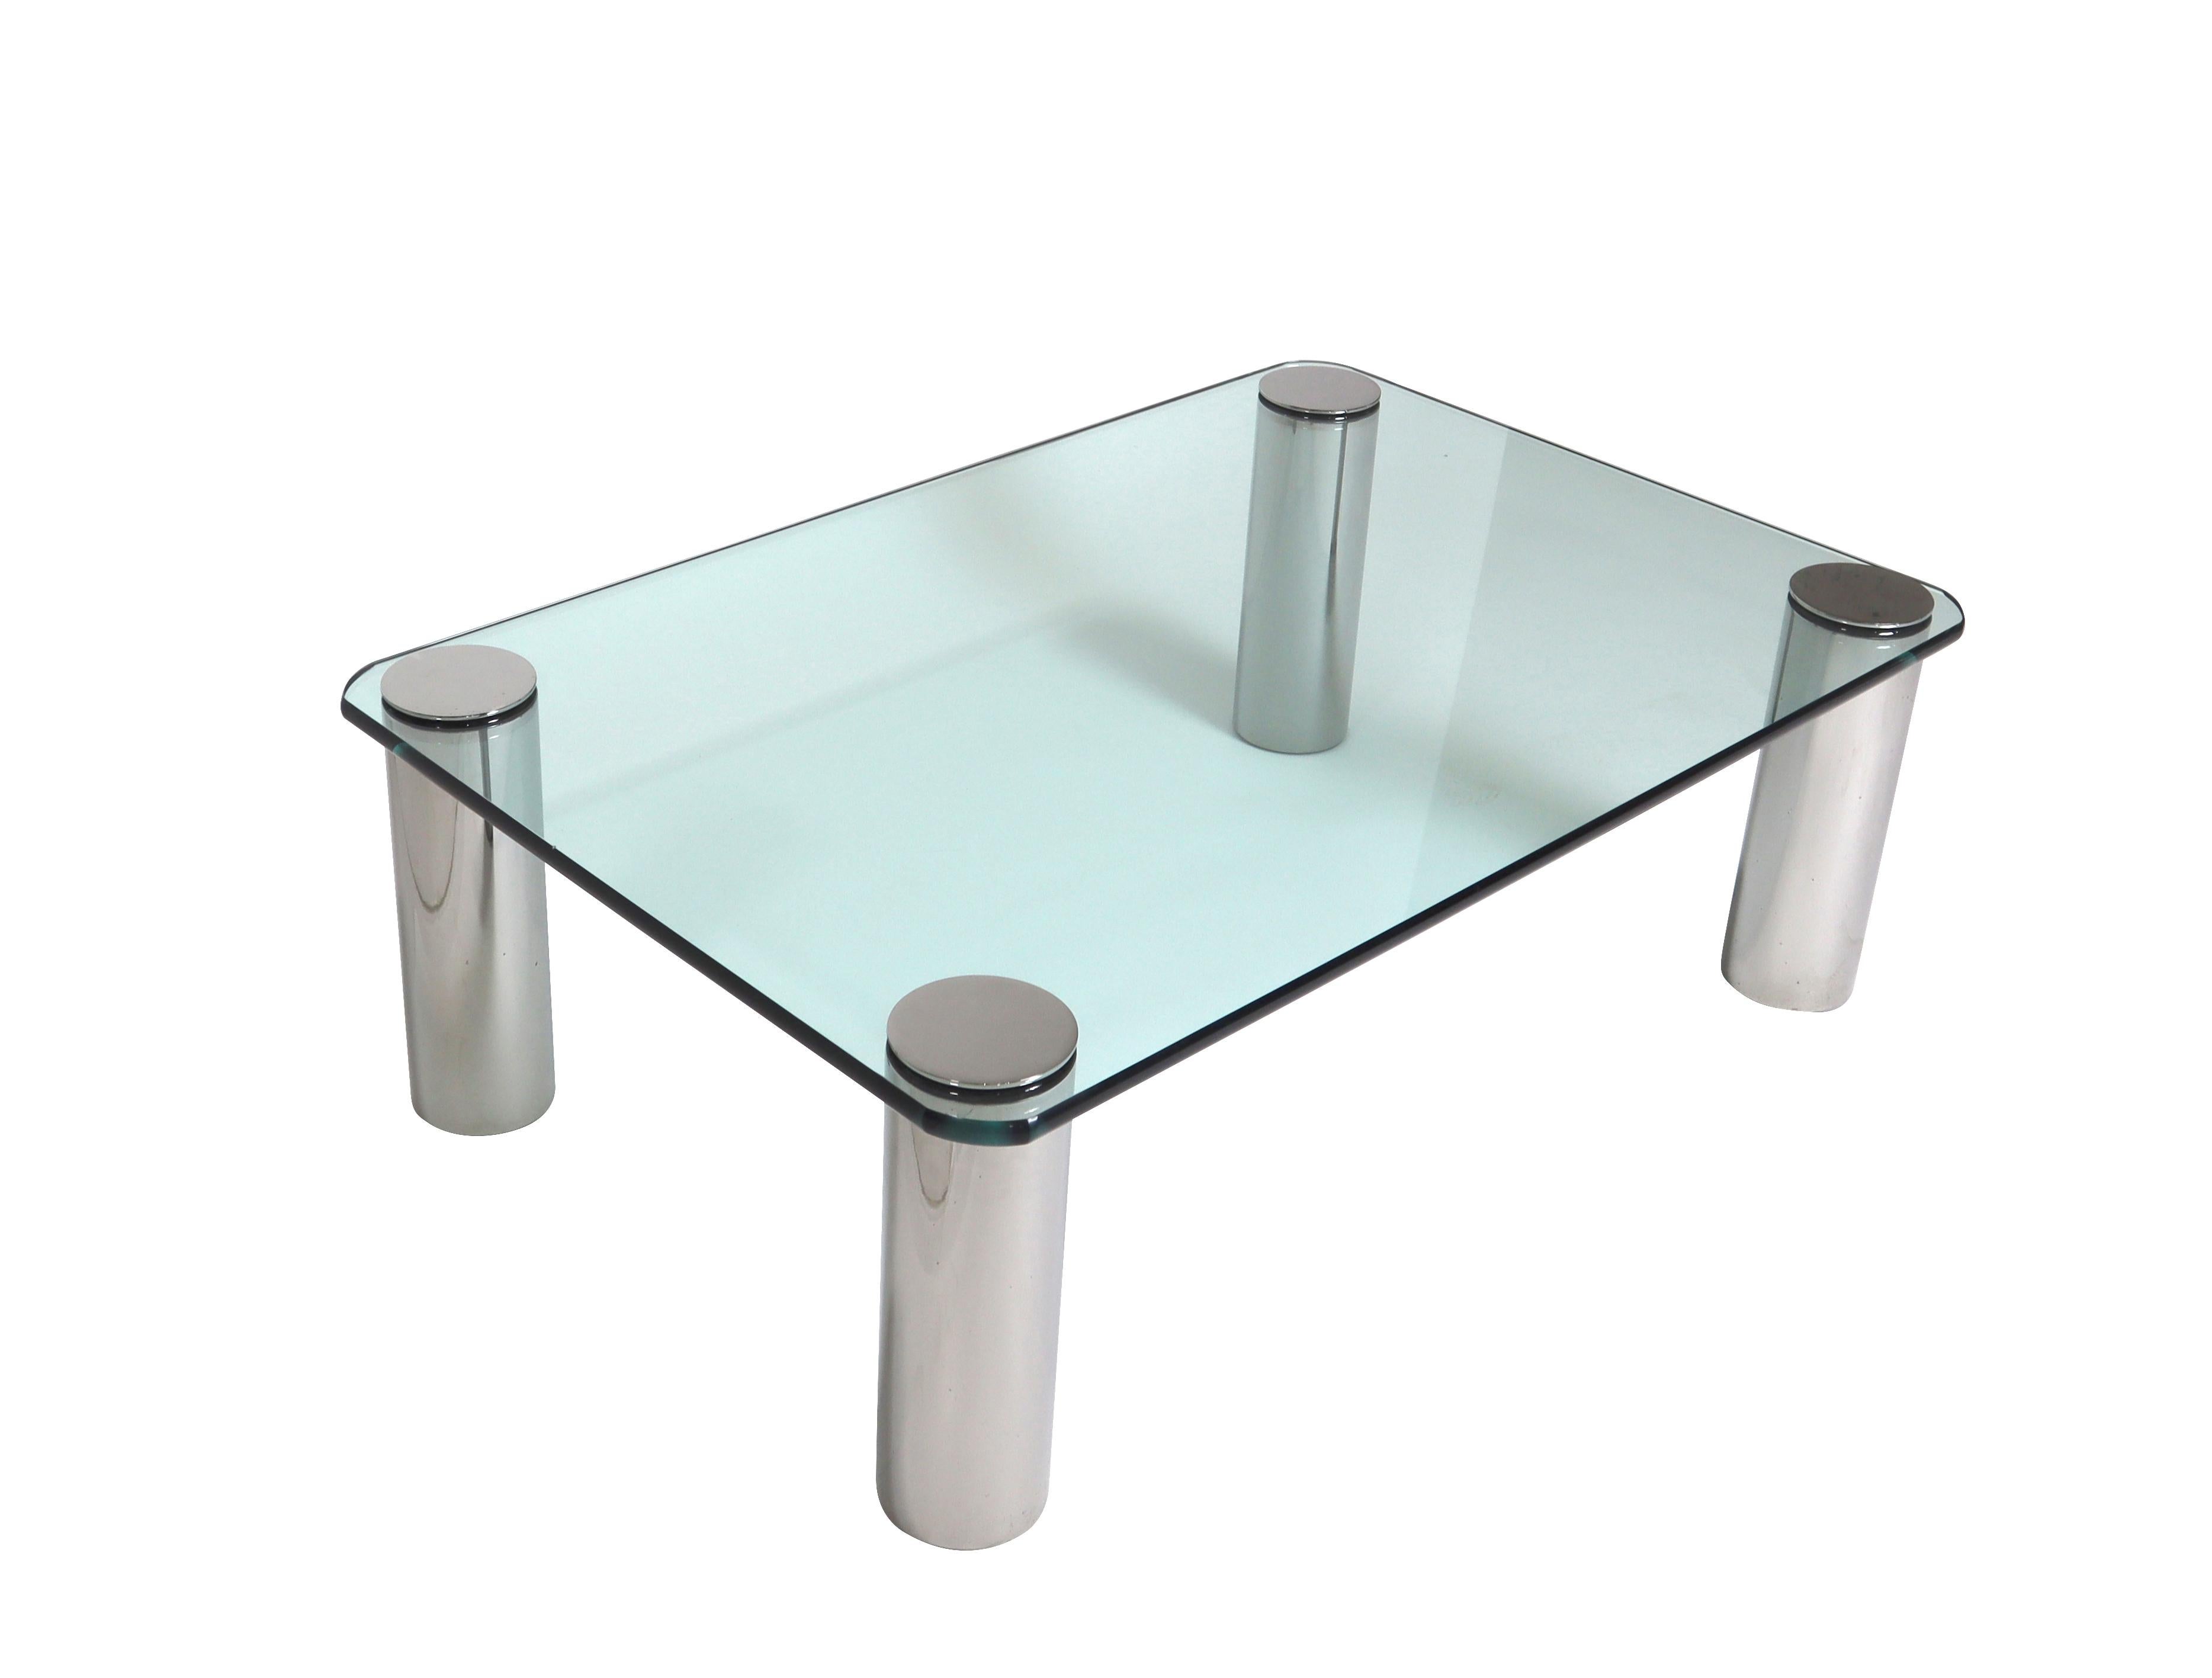 Mid-Century Modern Chrome and Glass Coffee Table, Leon Rosen for Pace